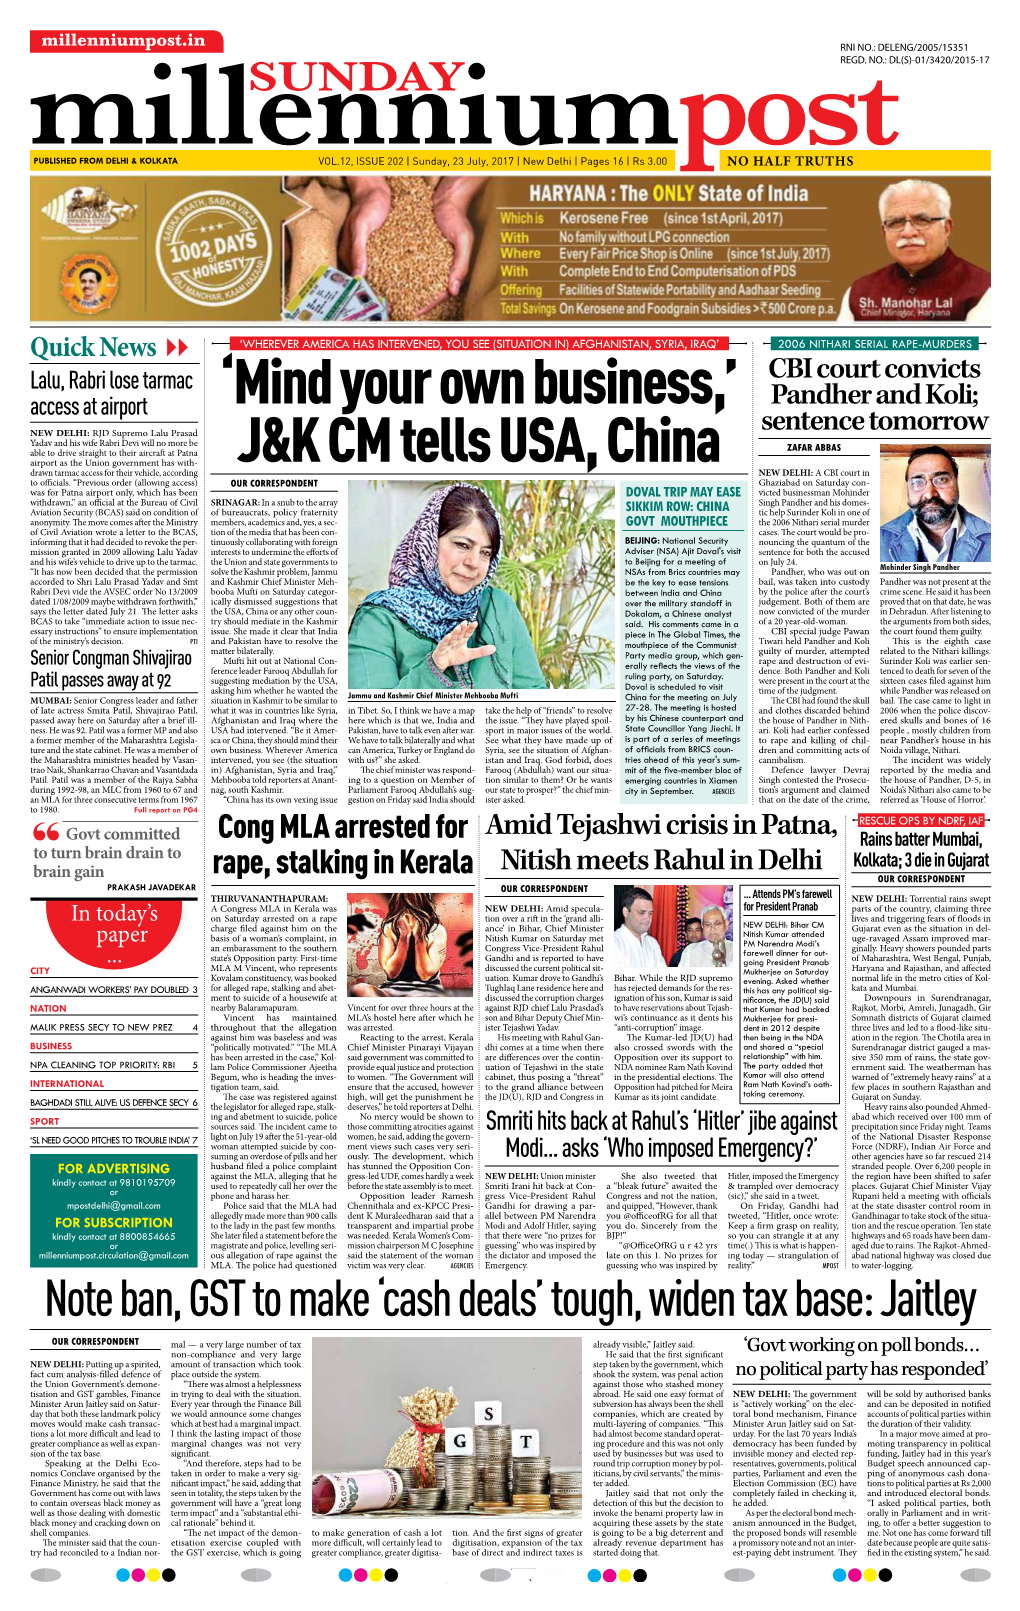 'Mind Your Own Business,' J&K CM Tells USA, China